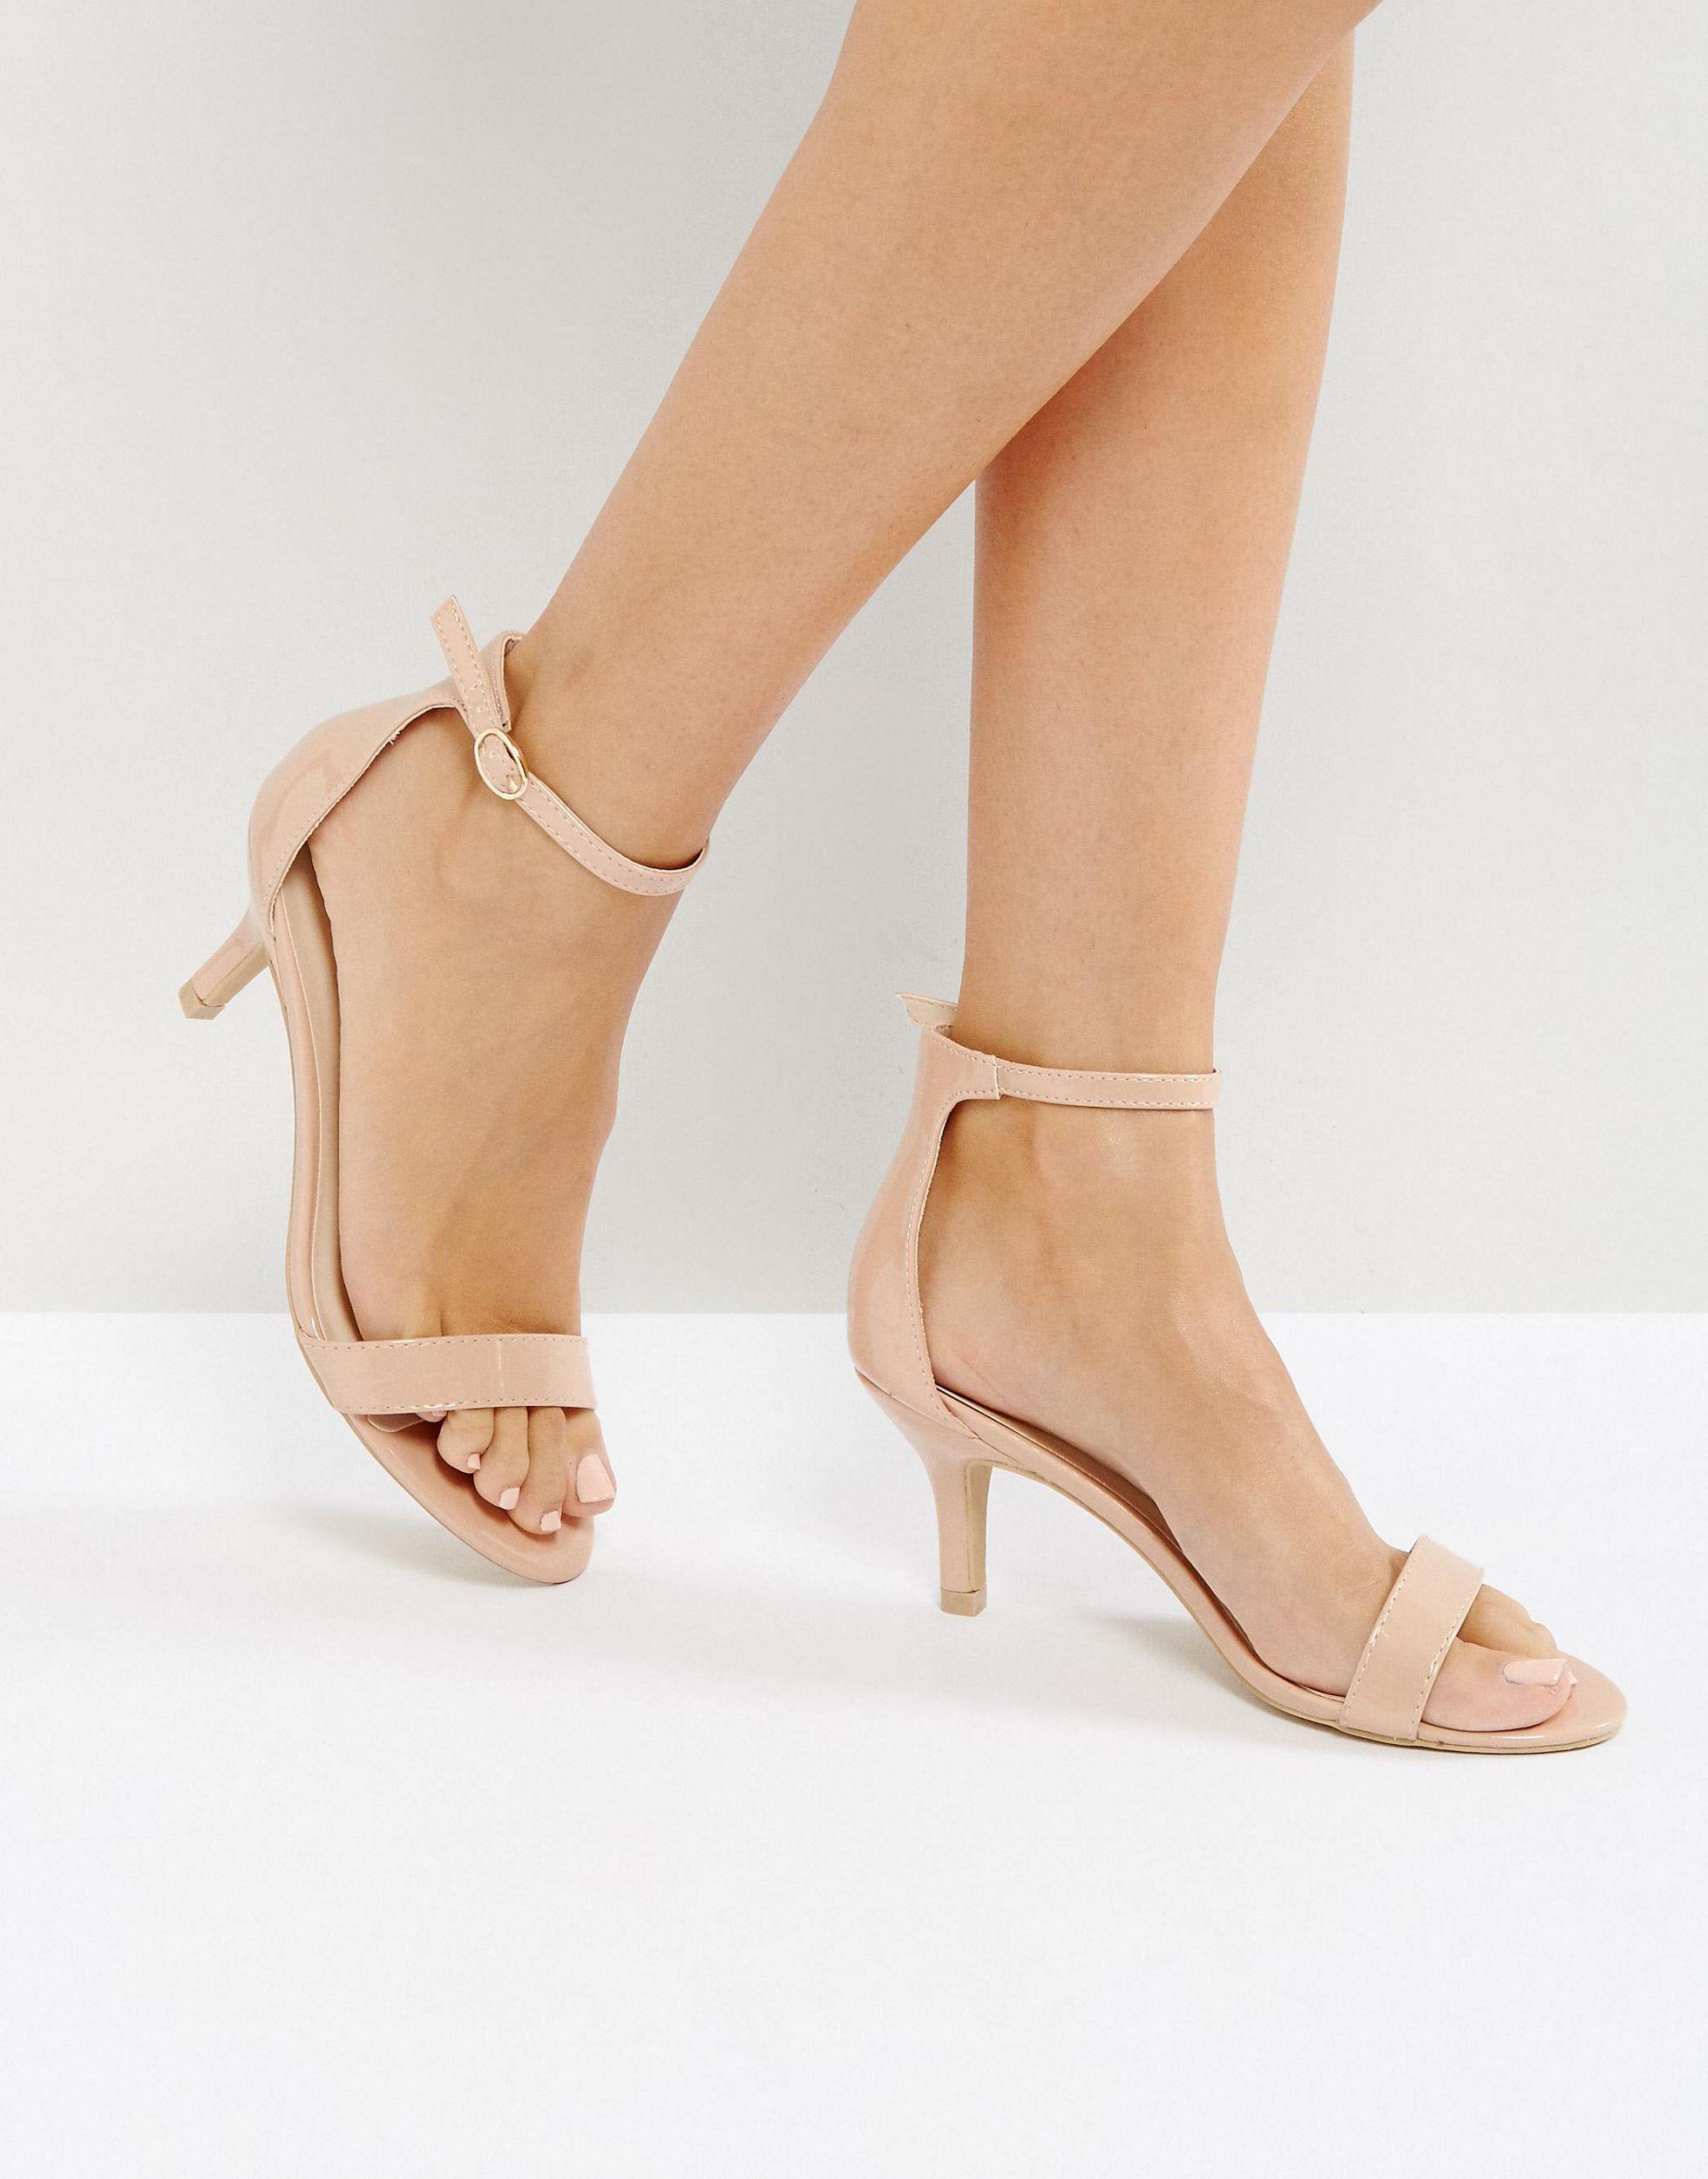 Pilgrim sent handicapped Glamorous Nude Barely There Kitten Heeled Sandals in Natural | Lyst  Australia